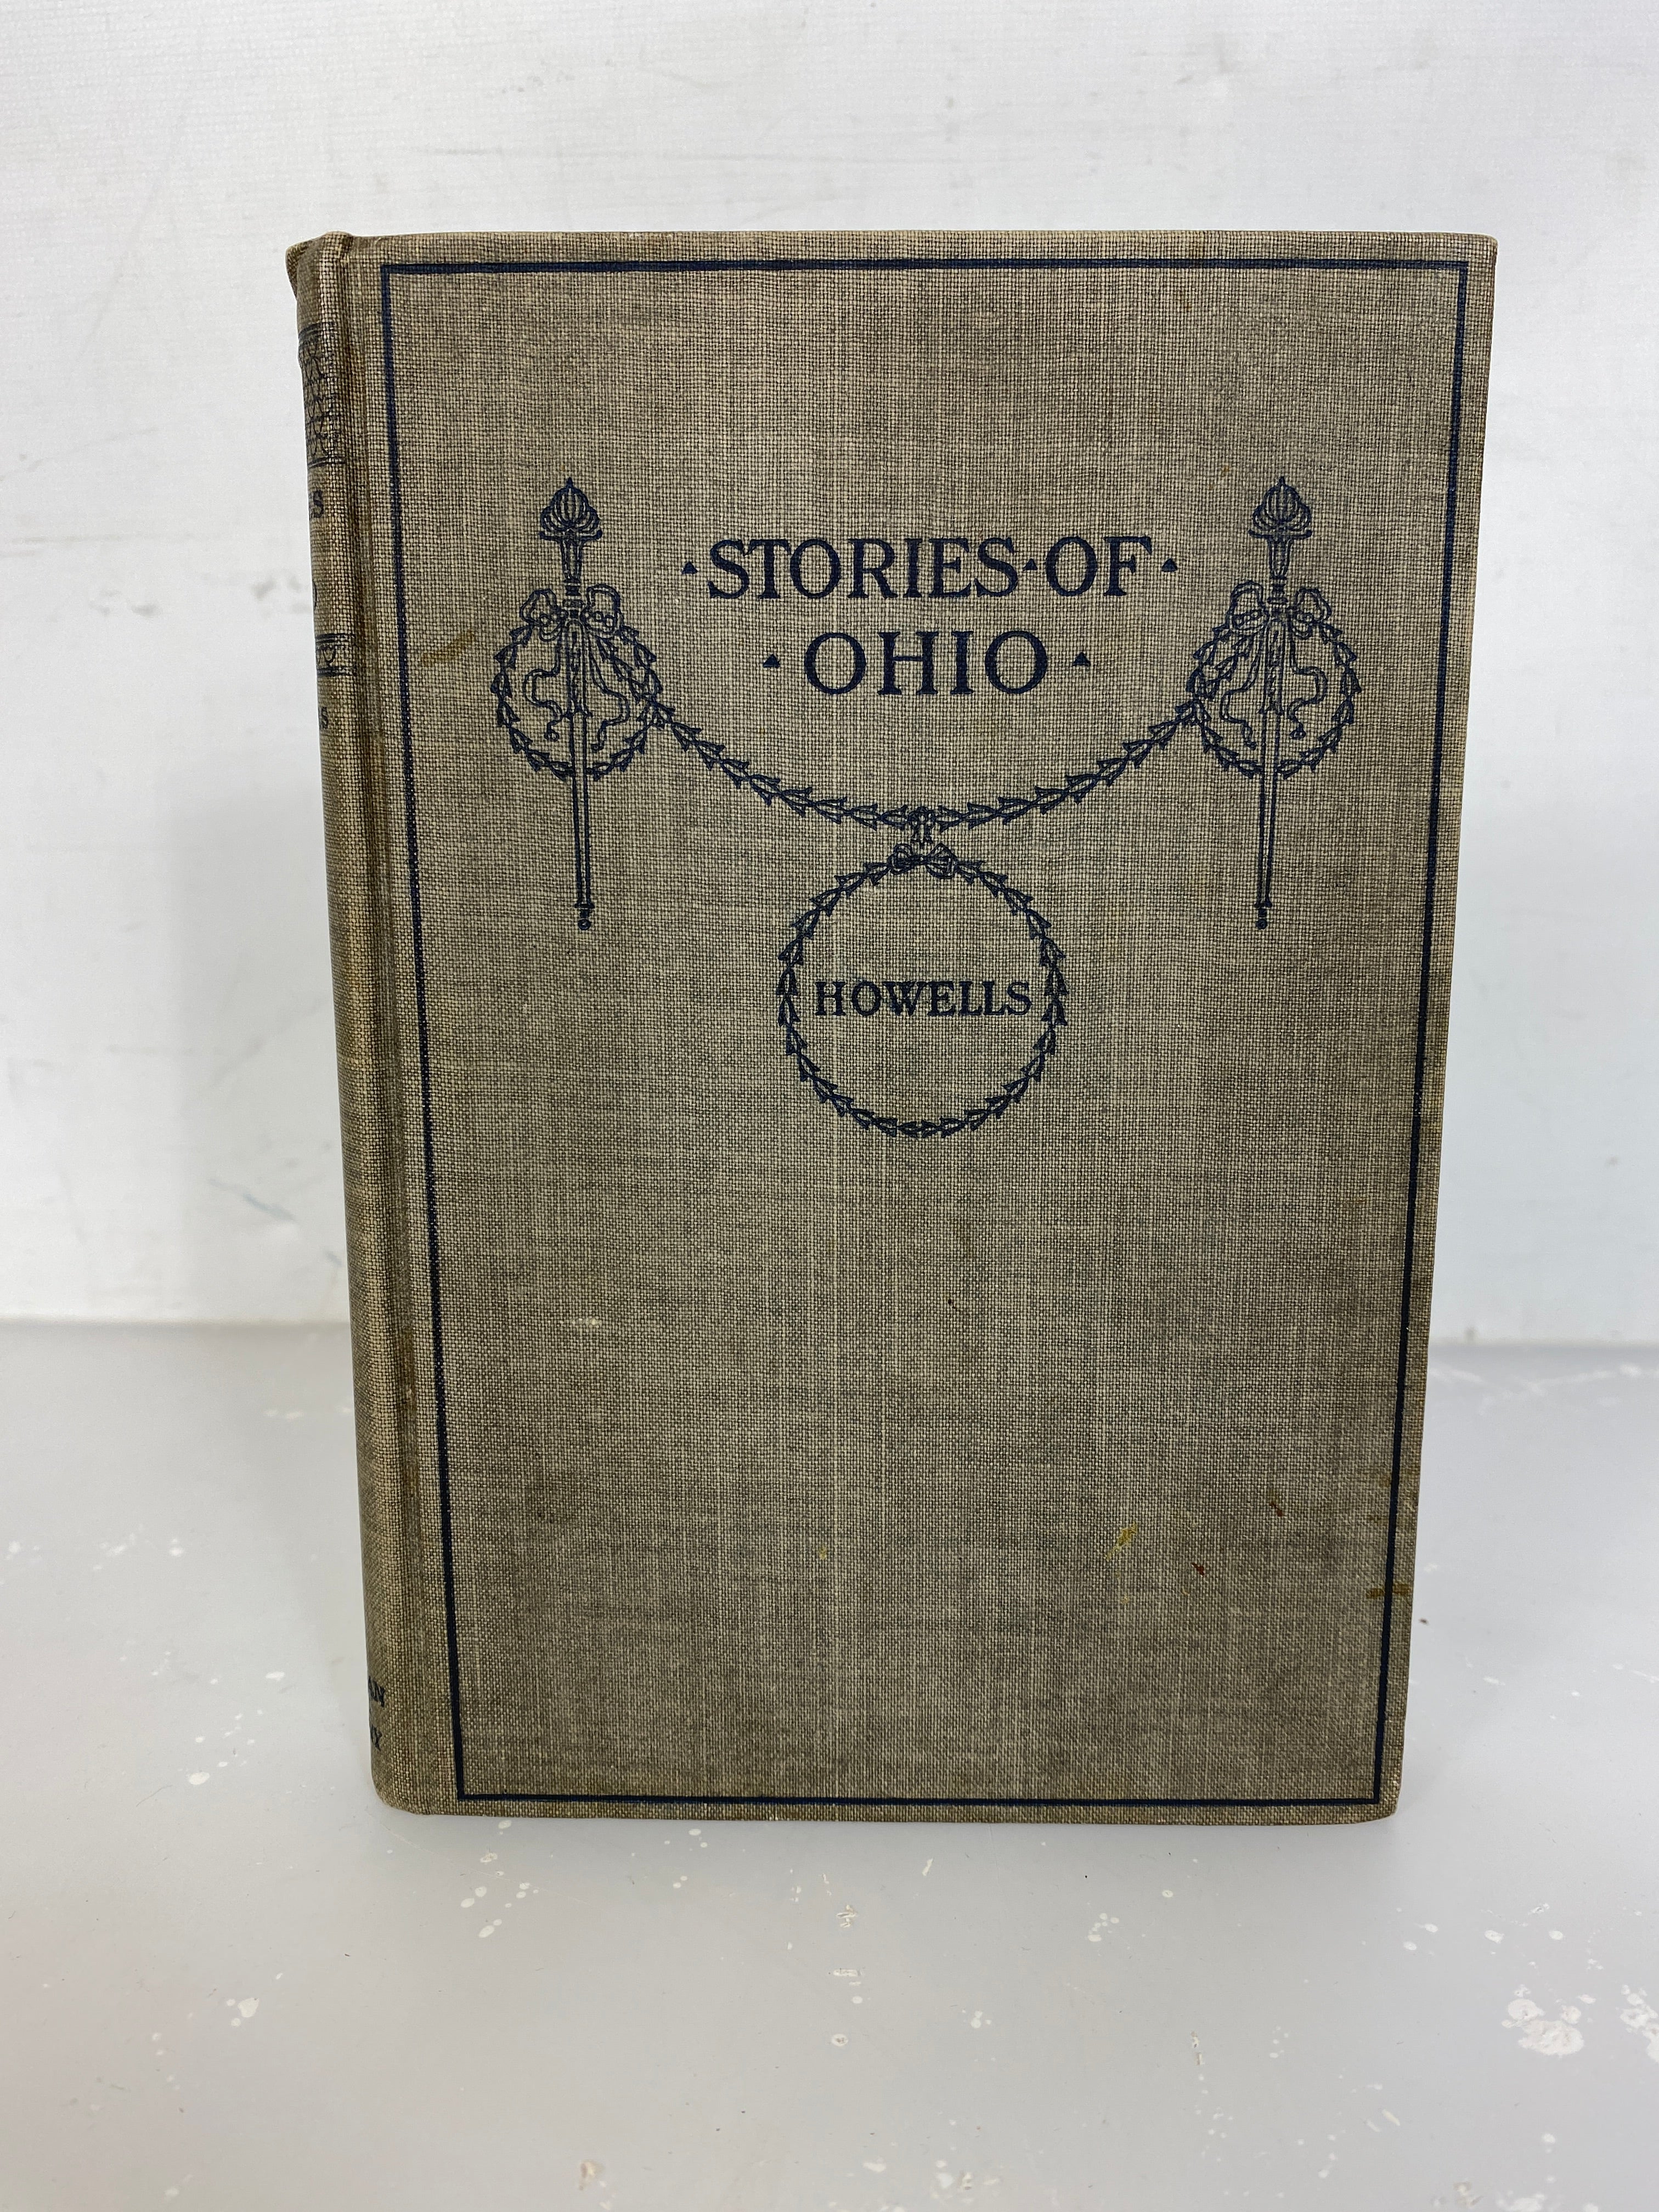 Antique Stories of Ohio by William Dean Howells 1897 American Book Company HC